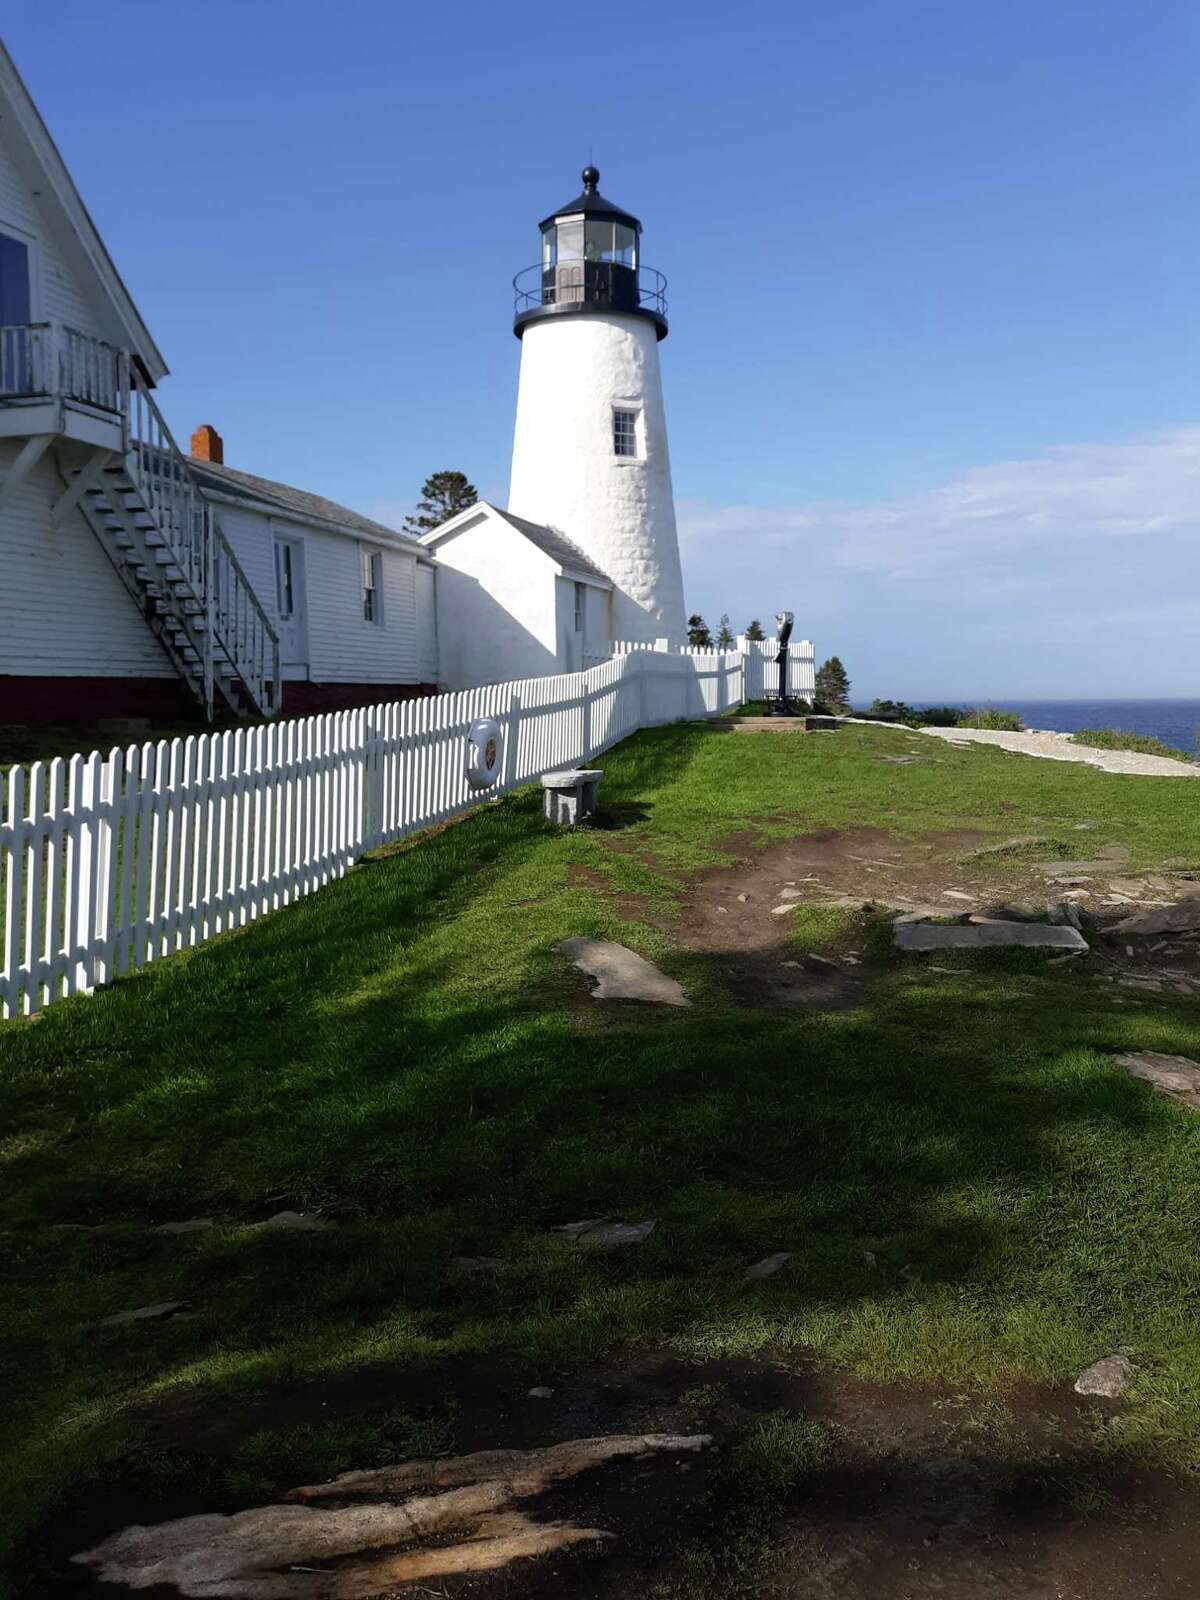 The iconic lighthouse at Pemaquid Point in New Harbor, just a few hundred yards from the author's cabin.